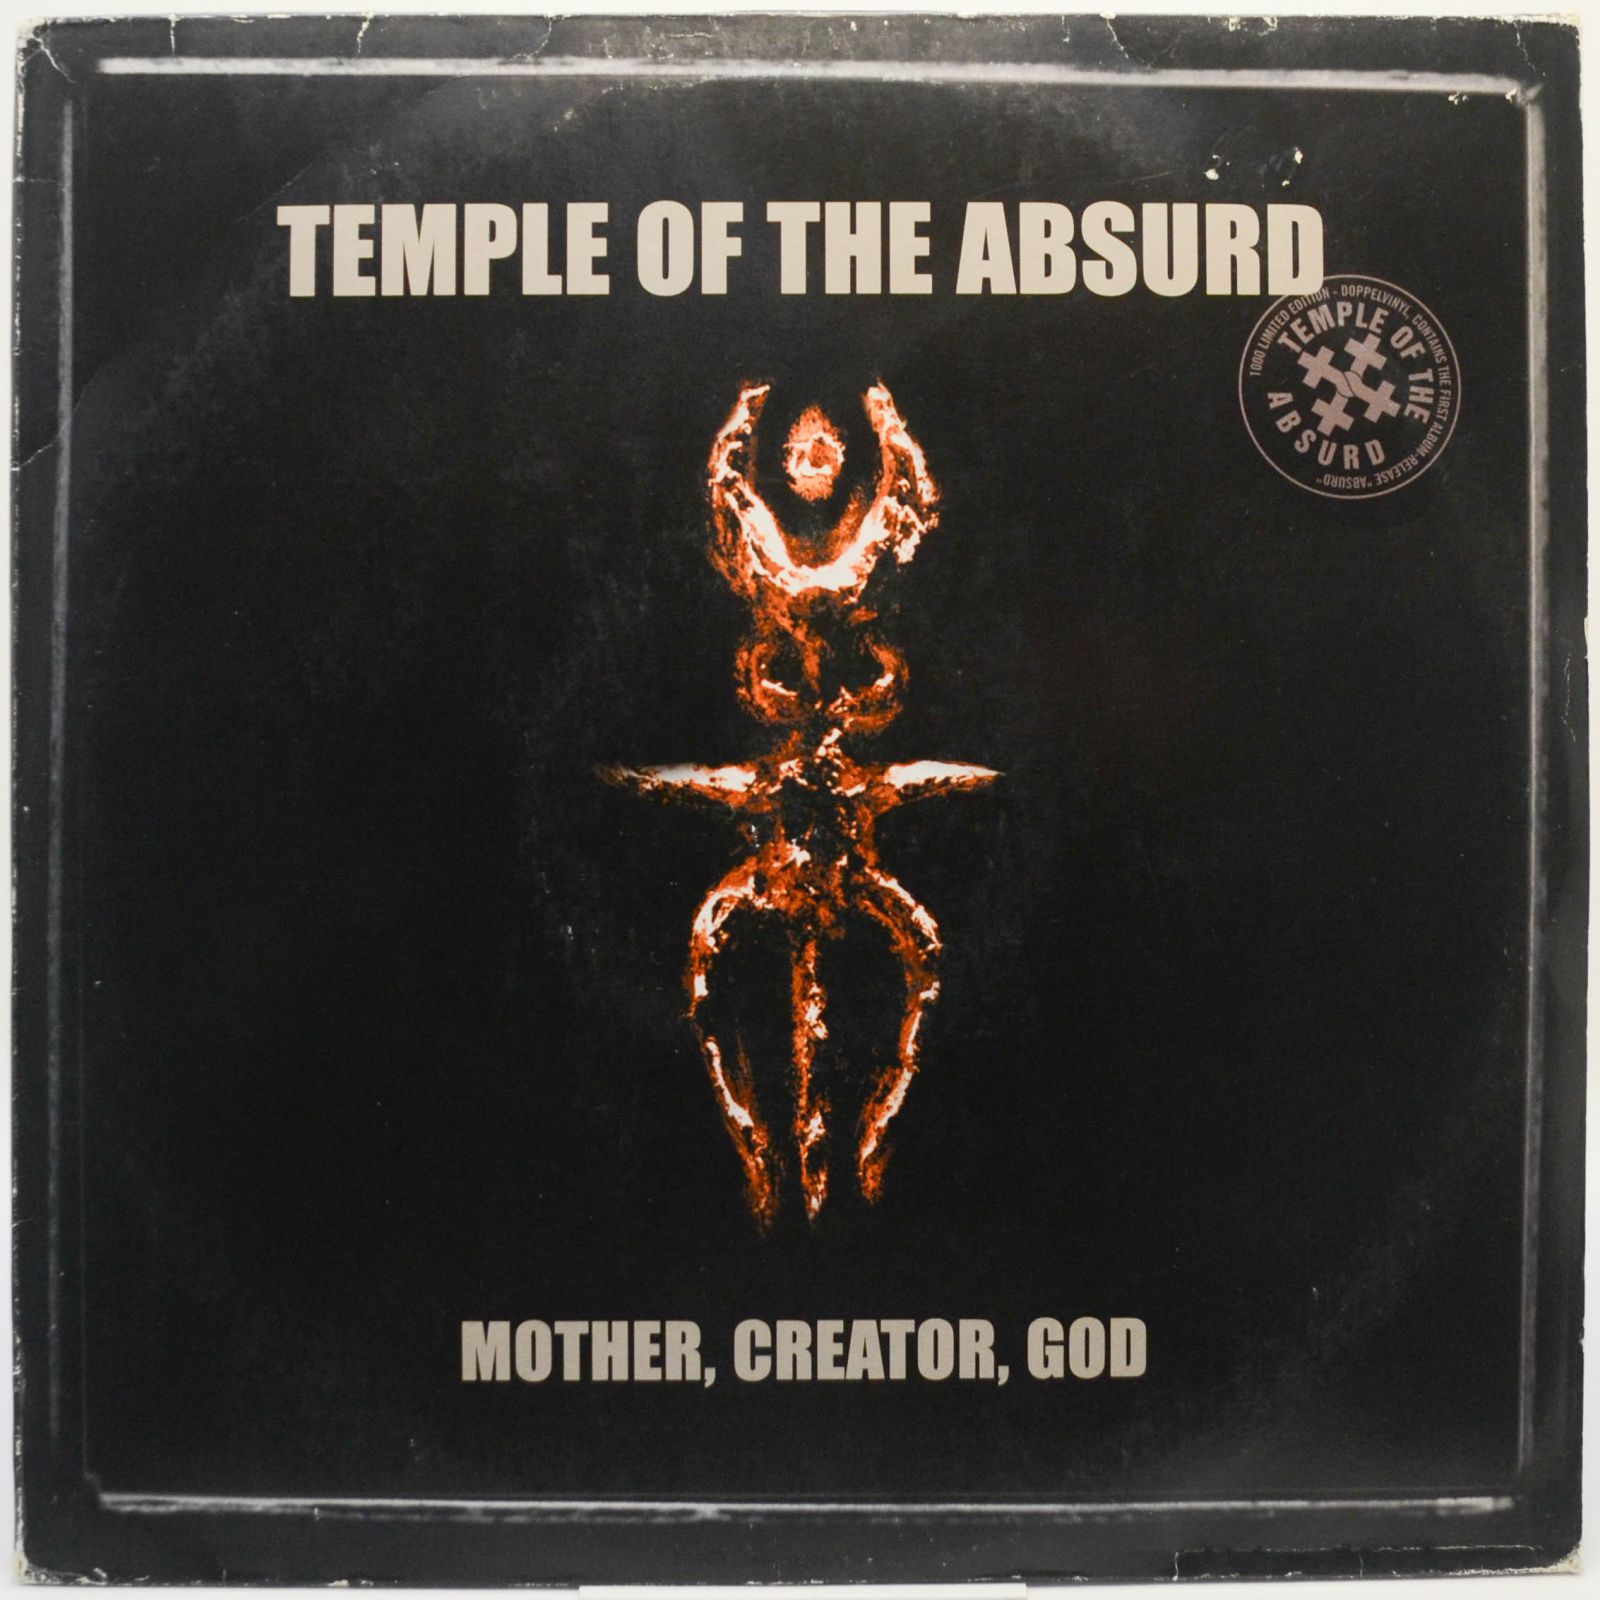 Temple Of The Absurd — Mother, Creator, God 2LP, 1999